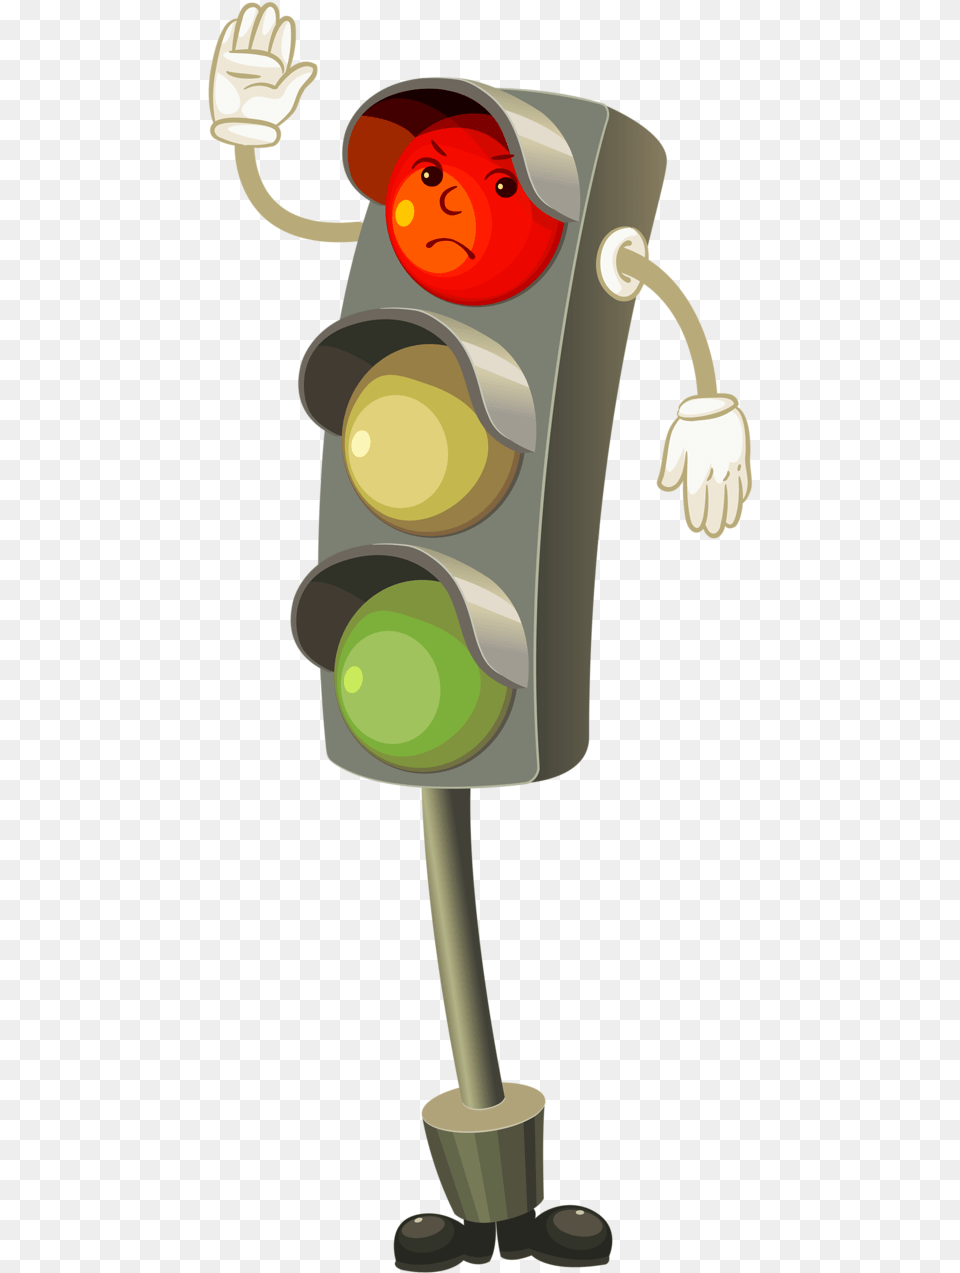 Transparent Stop Light Related To Traffic Rules, Traffic Light Free Png Download